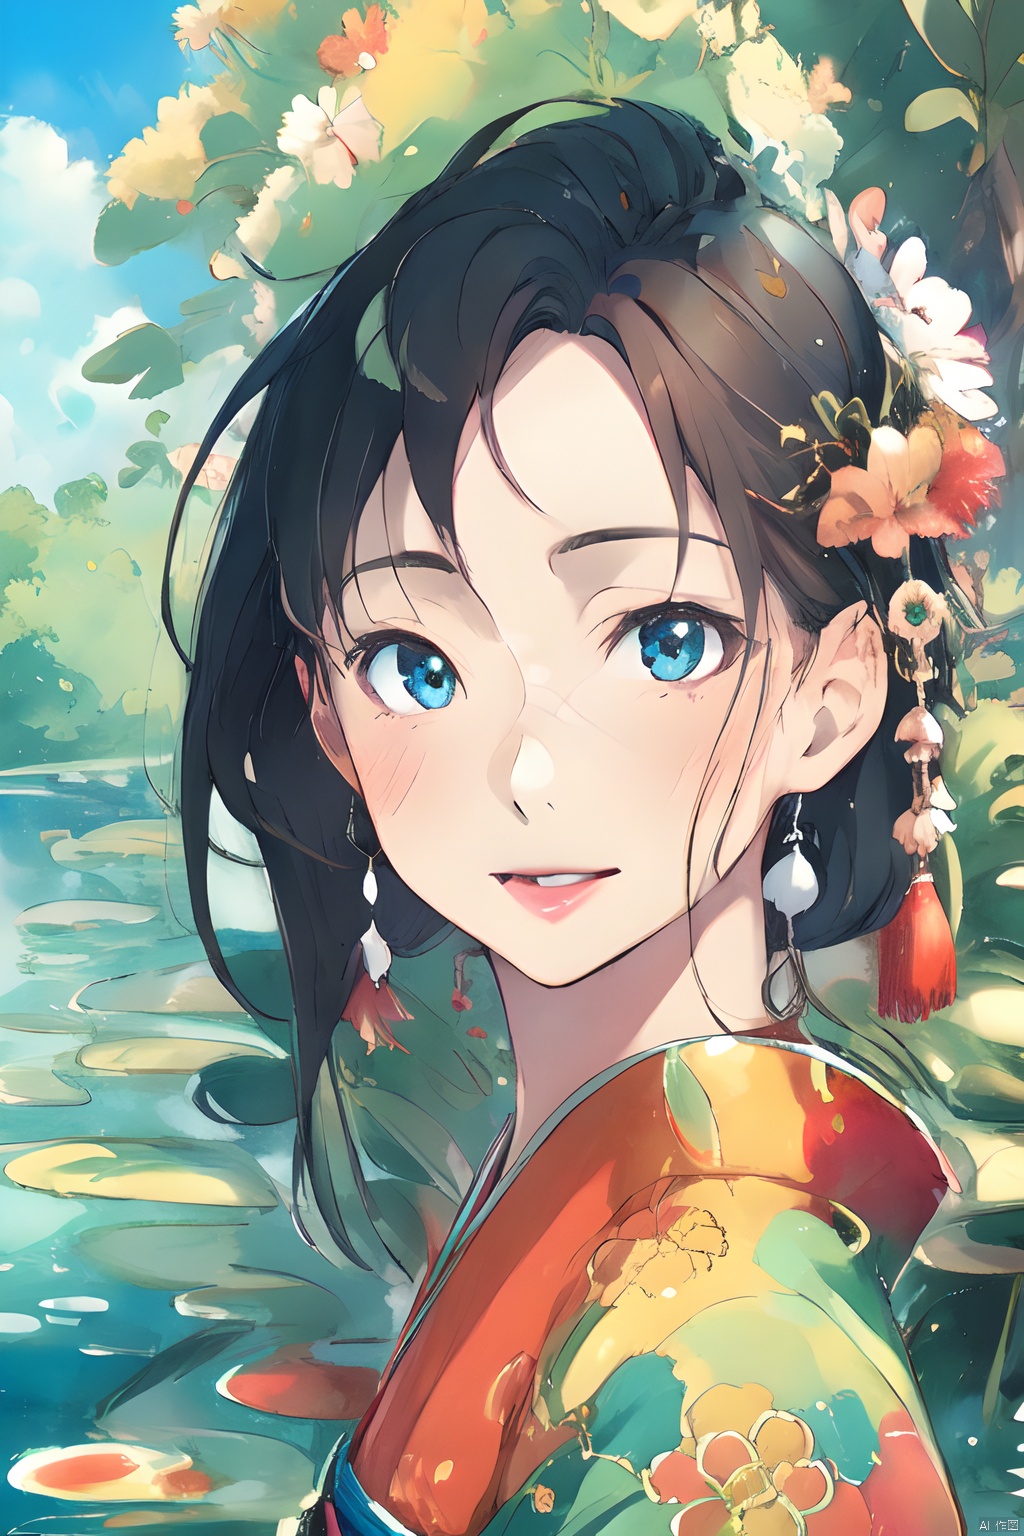  (Masterpiece:1.2), (high quality),(Pixiv:1.4),fansty world,(Delicate background),outdoor,water,floating,colorful world,kimono,beautiful face,1girl,anime,girl,Chinese style,watercolor